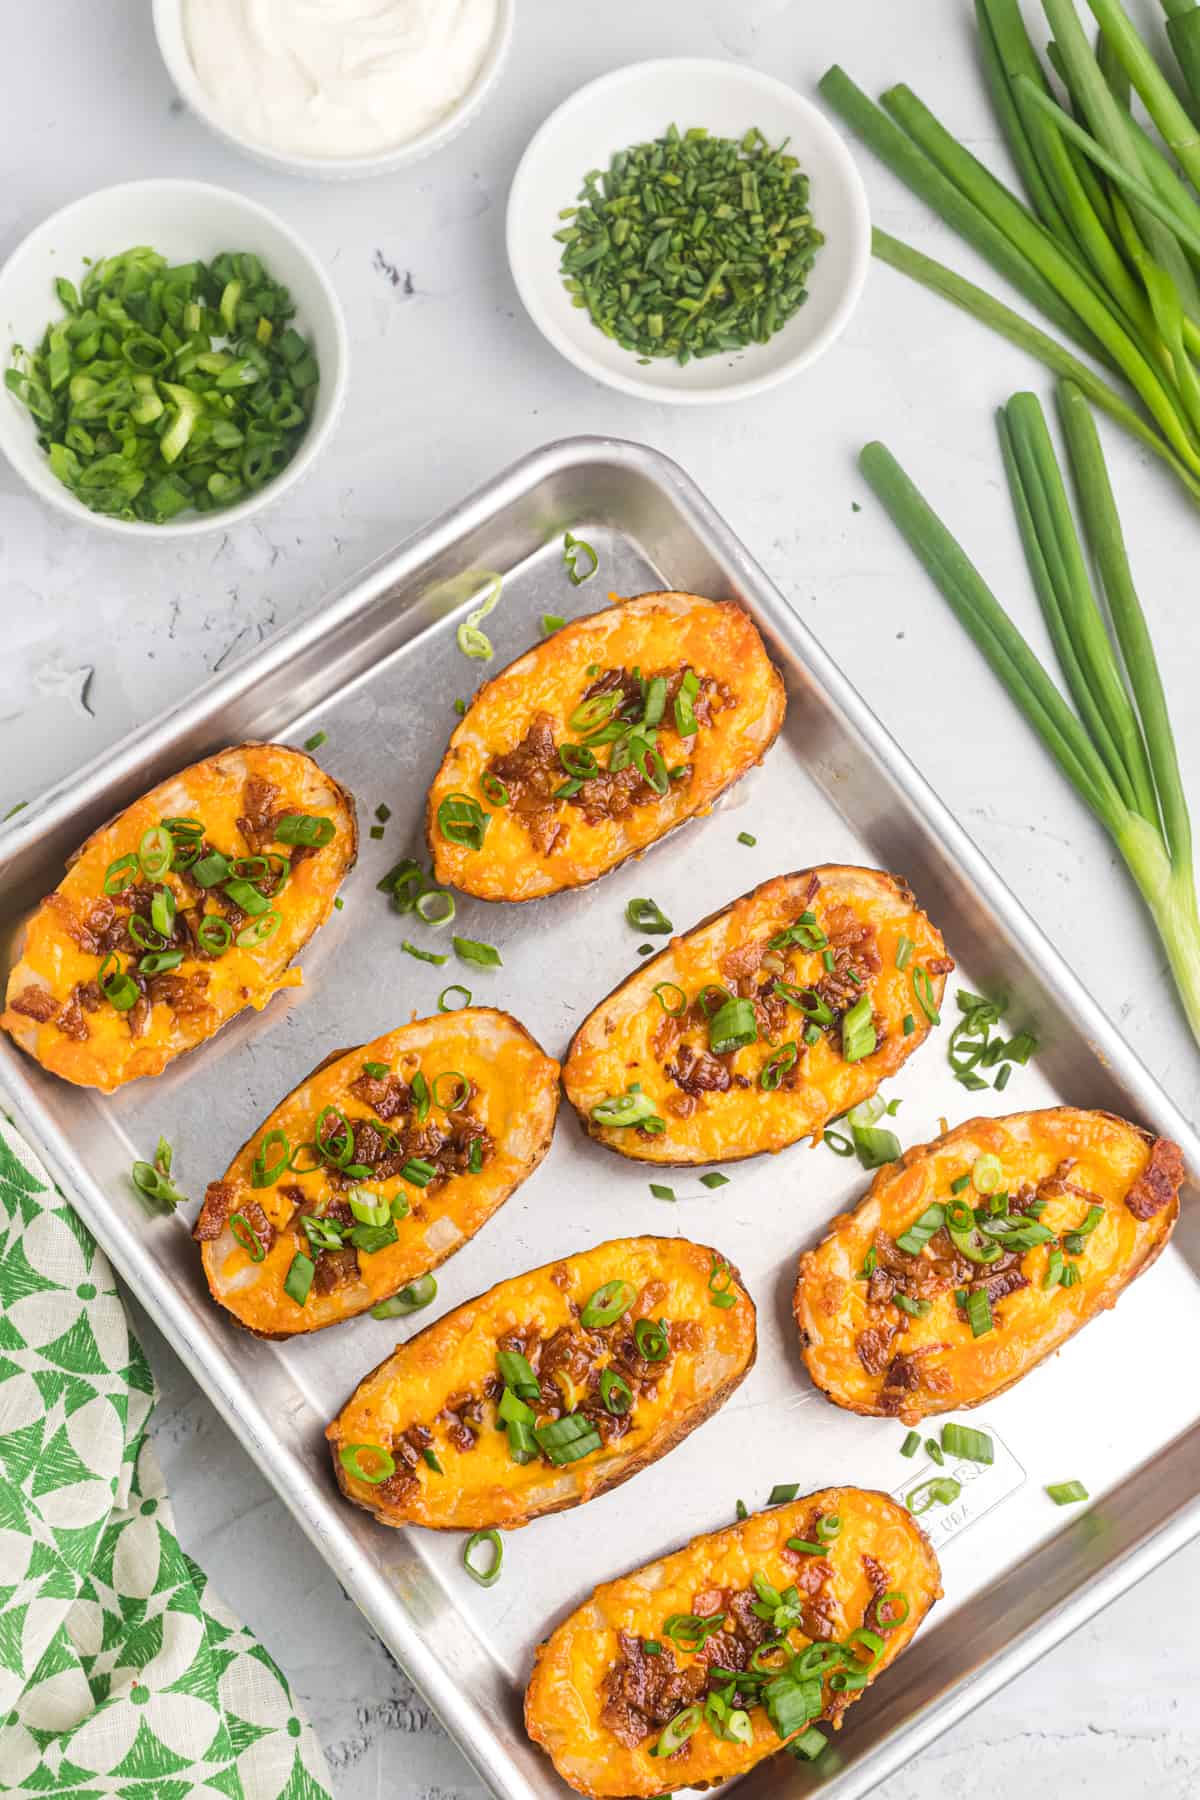 Baked loaded potato skins are placed on a baking sheet.